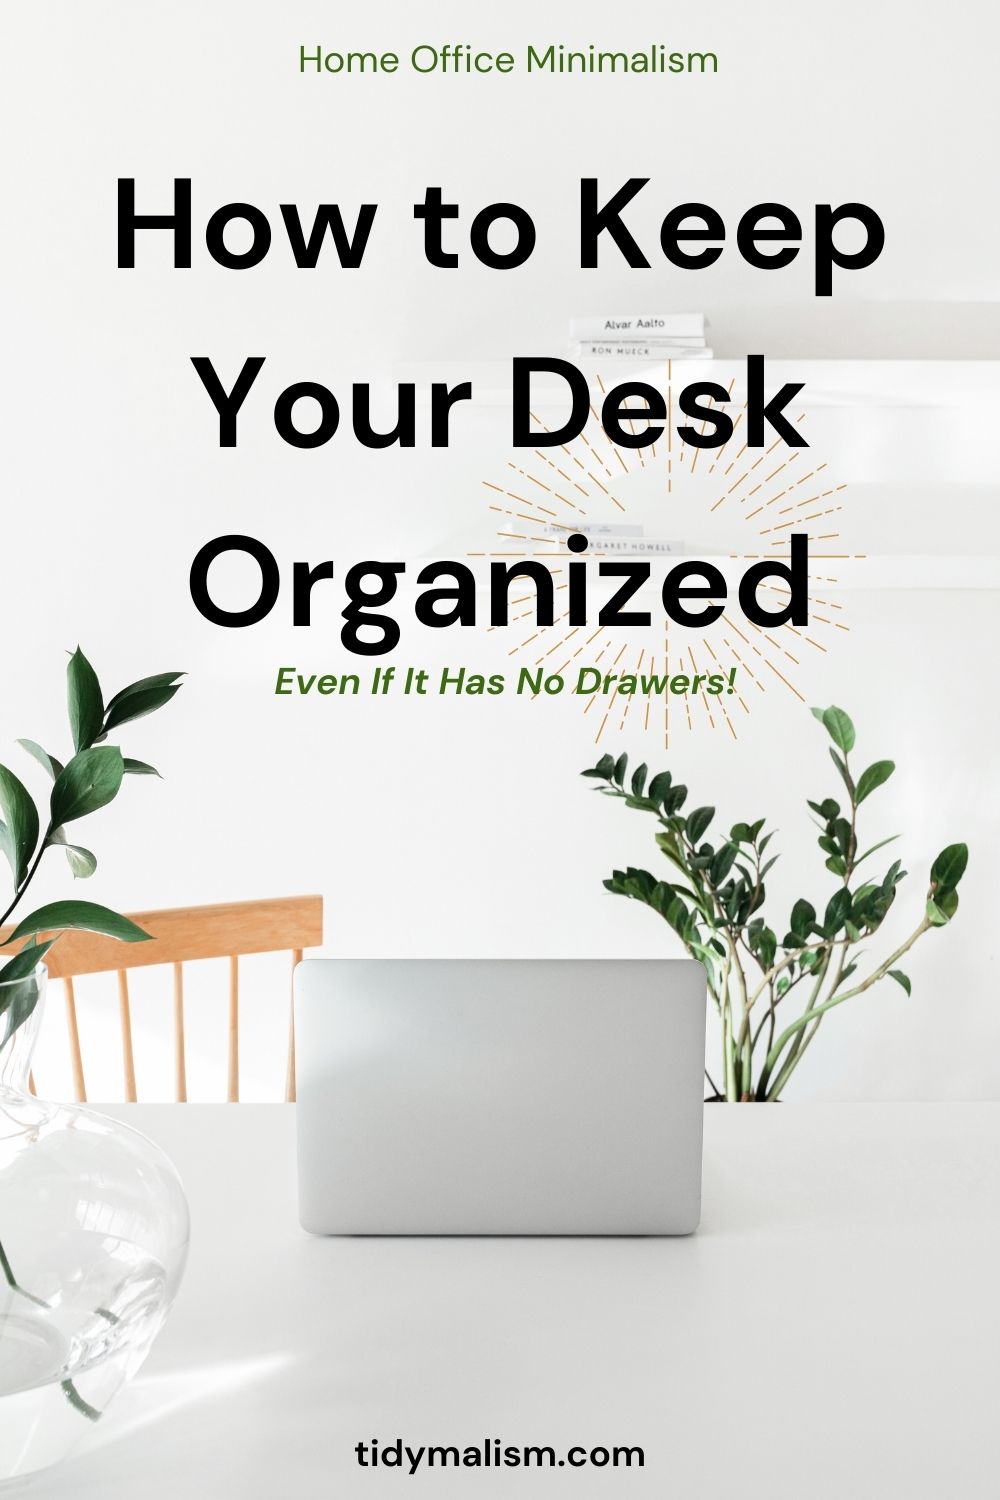 How I Organise a Desk Without Drawers